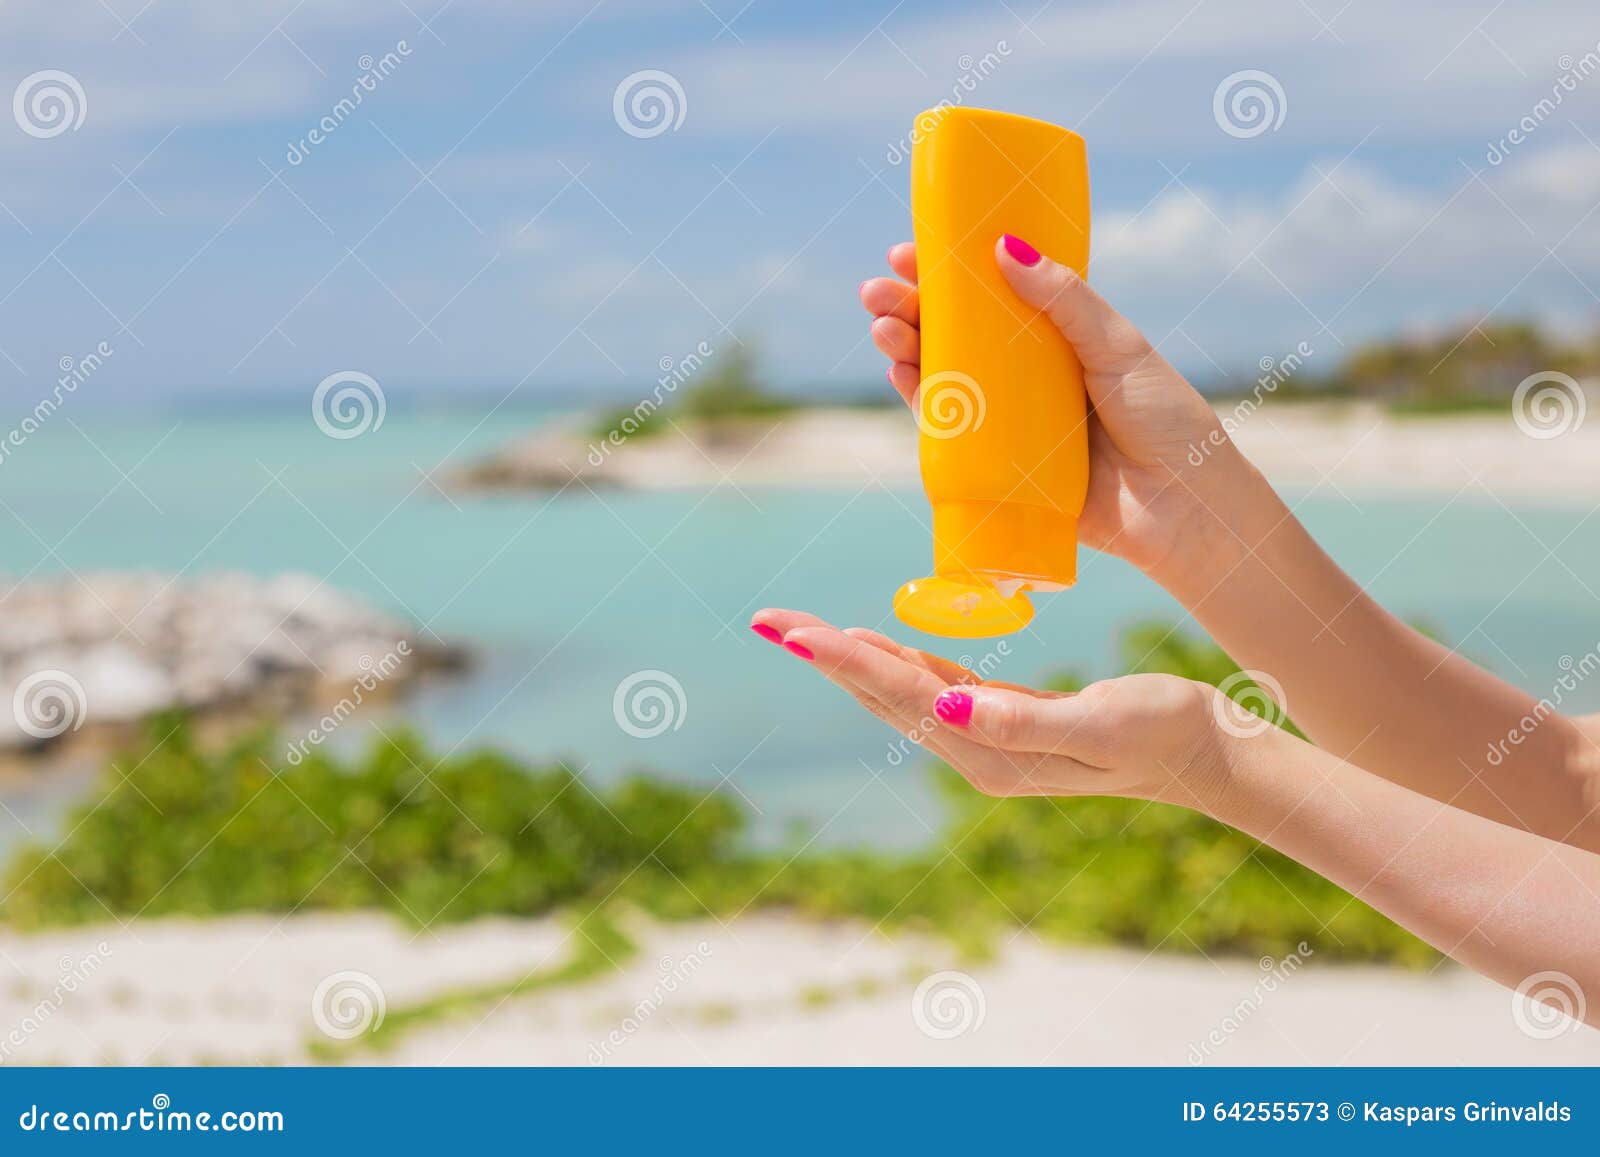 woman holding yellow sunscreen bottle in hands